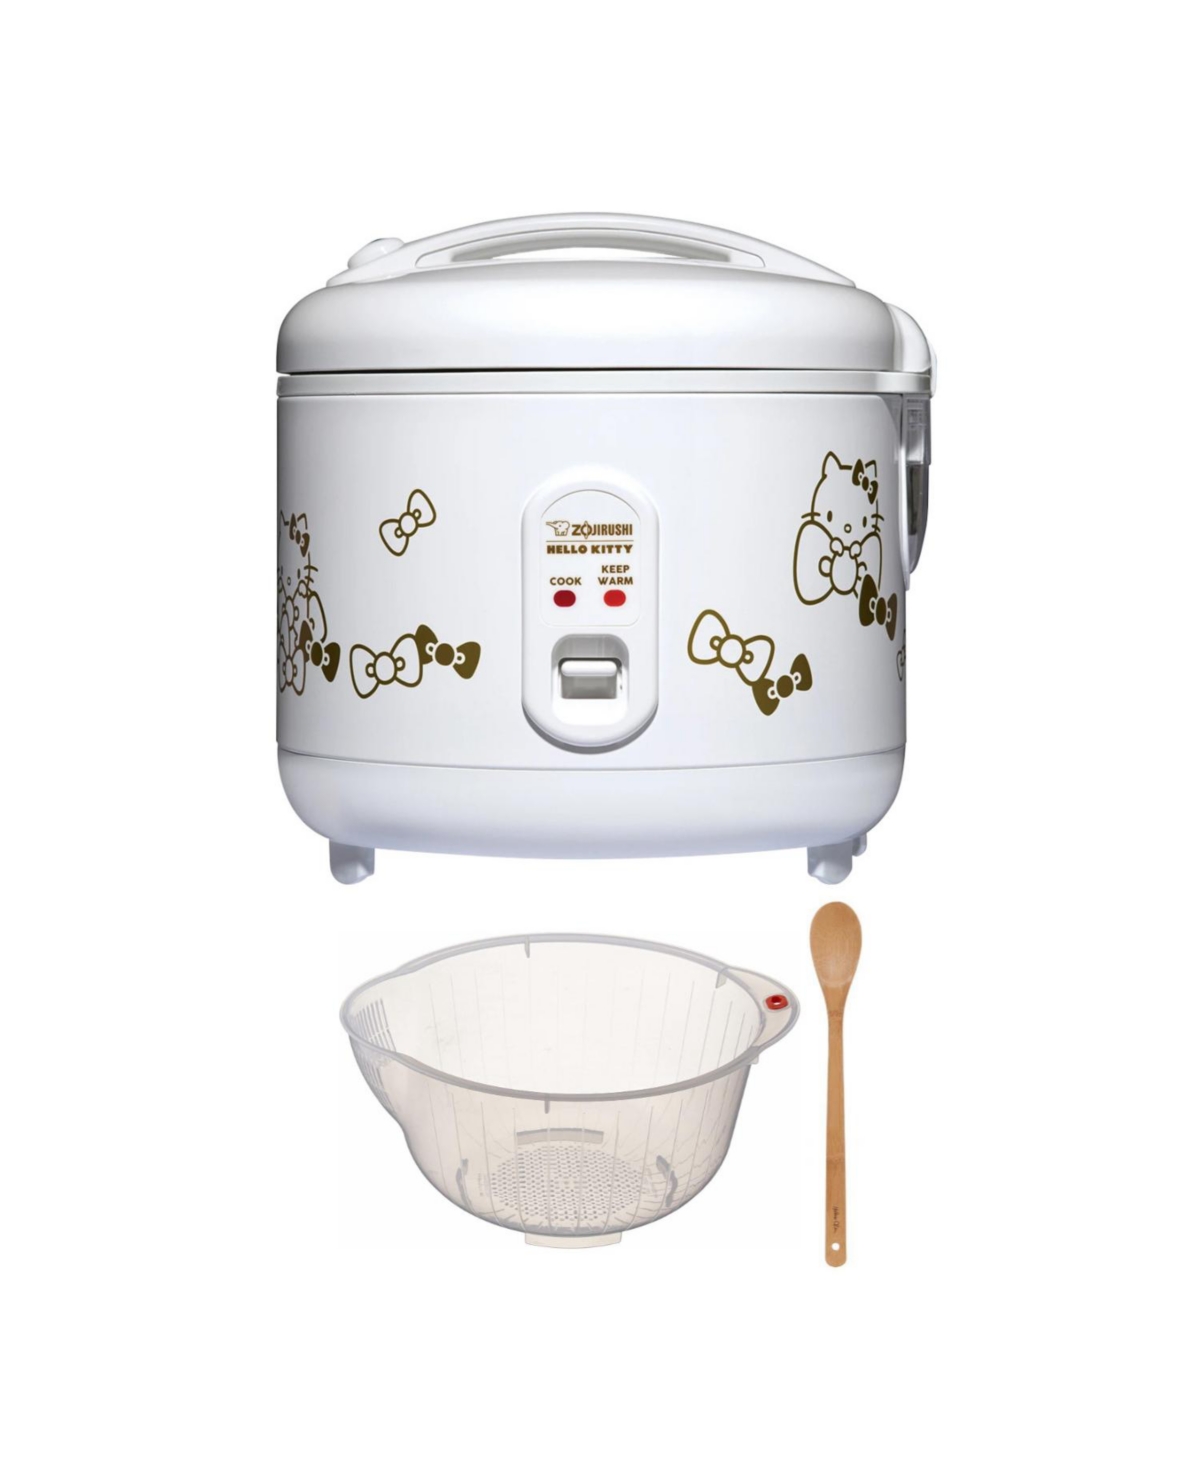 Hello Kitty 5.5-Cup Automatic Rice Cooker (White) with Washing Bowl - White